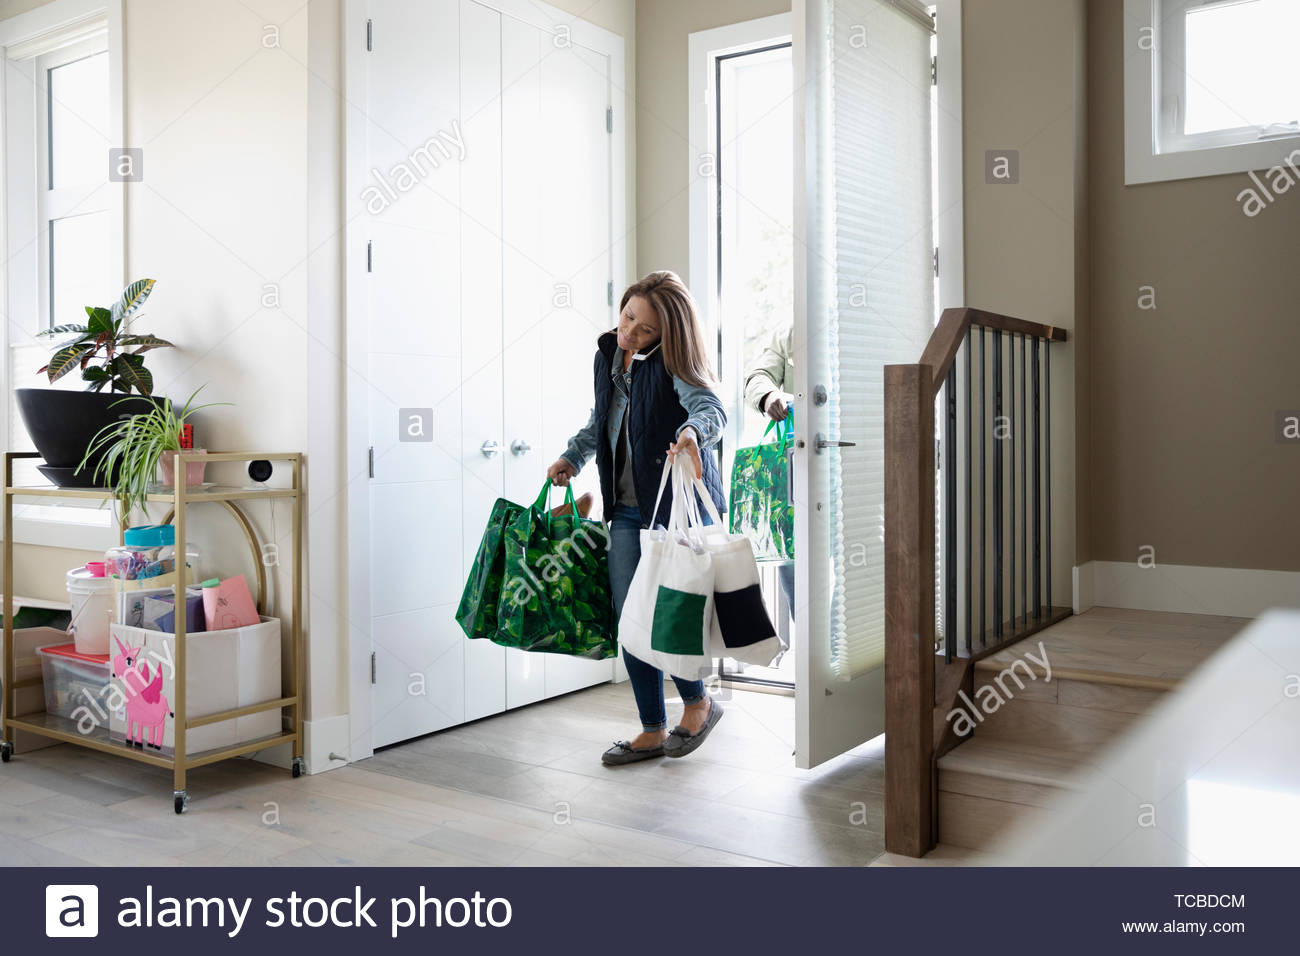 Woman with groceries talking on smart phone, entering house Stock Photo